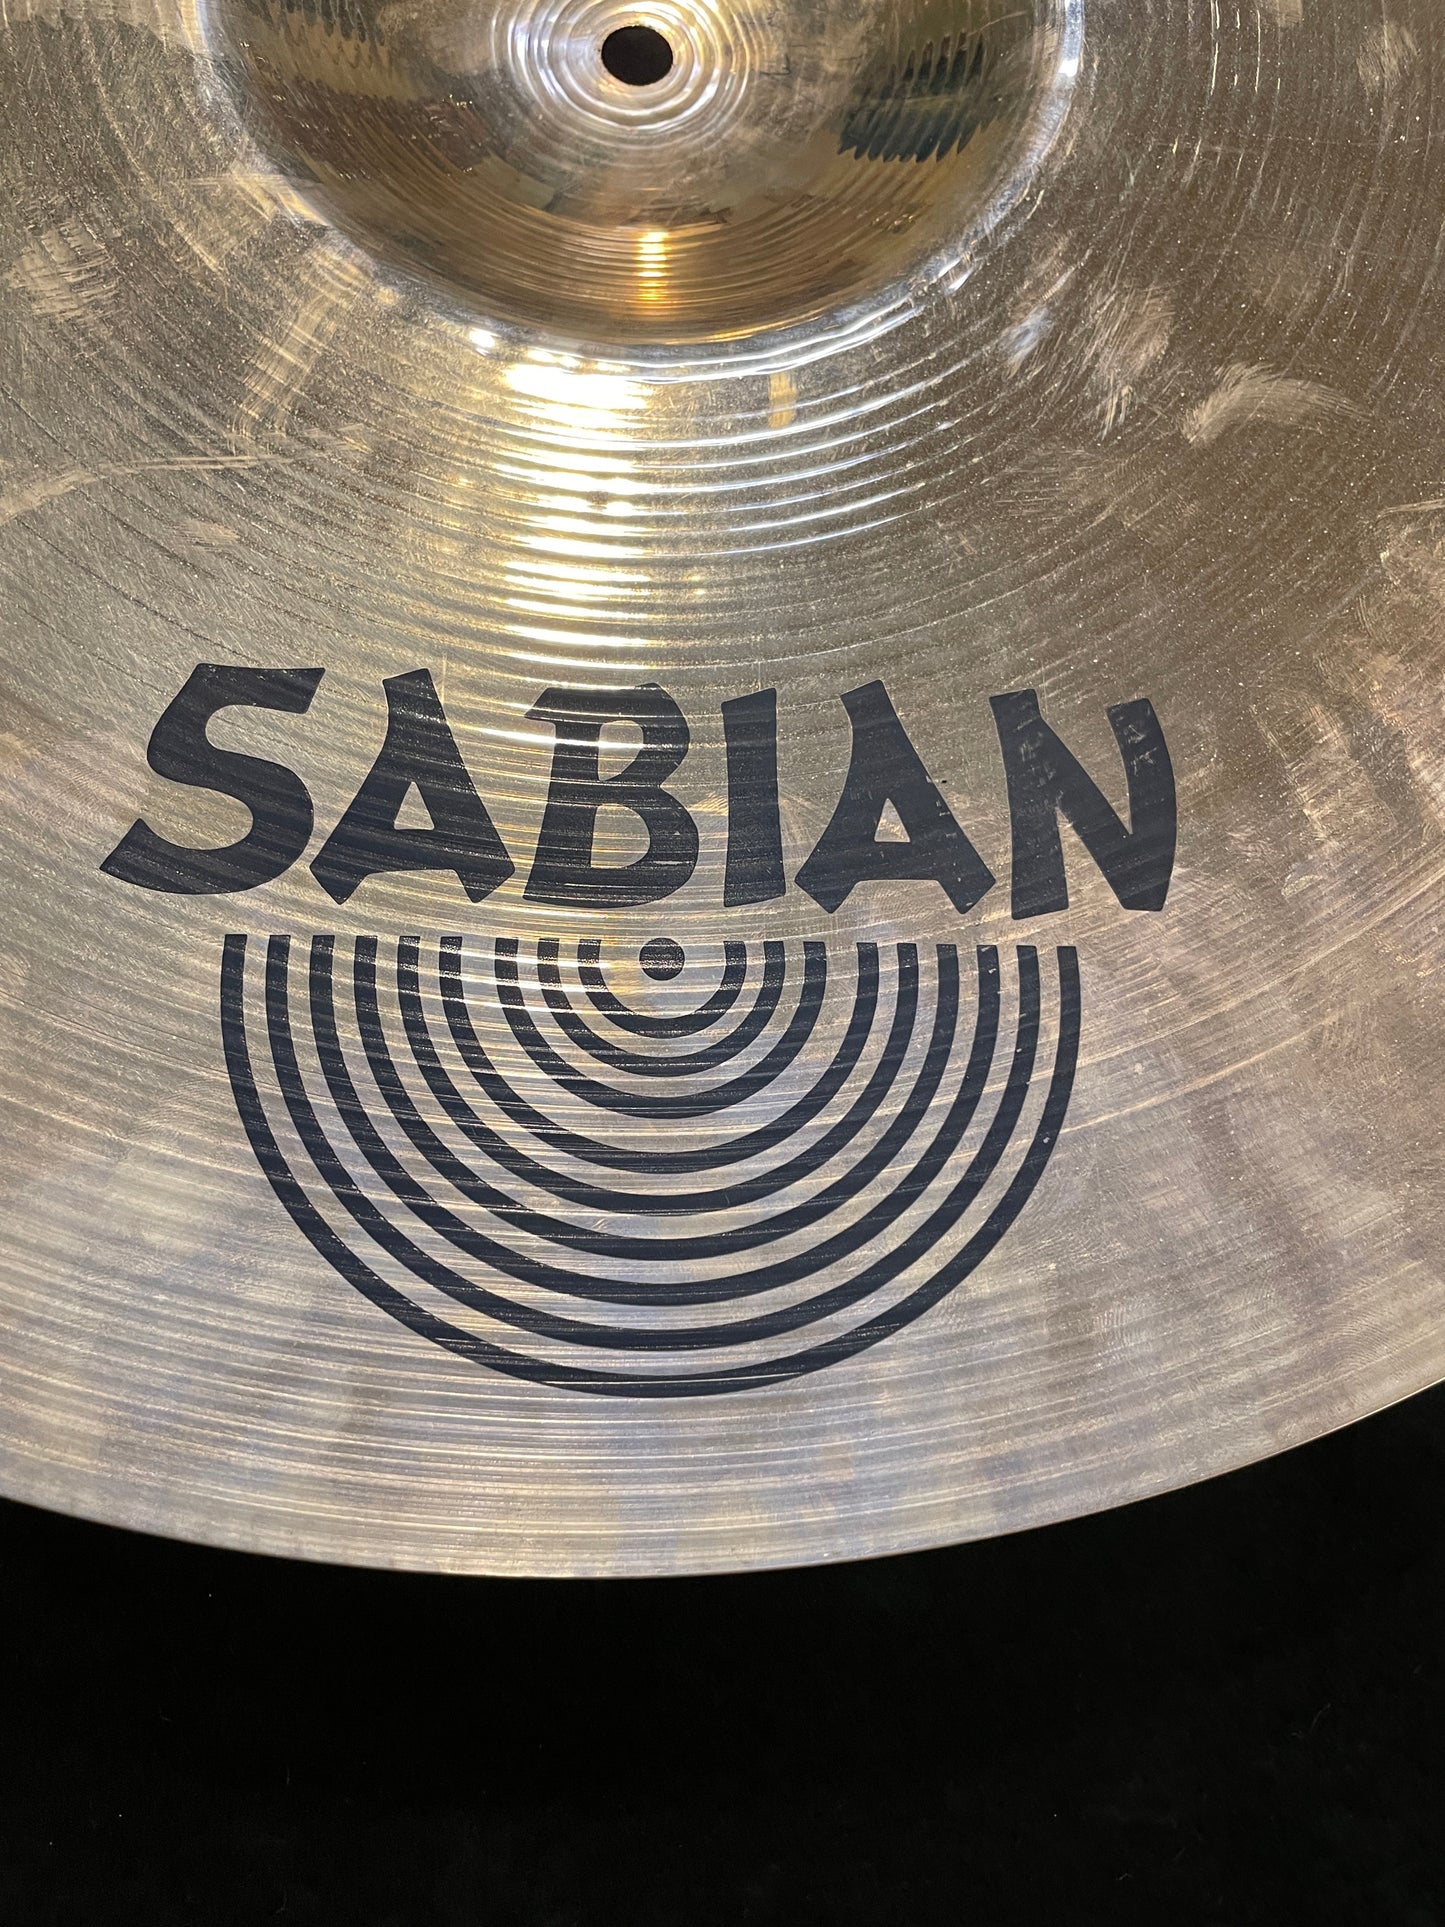 20" Sabian Hand Hammered HH Jazz Ride Cymbal 1864g *Video Demo*